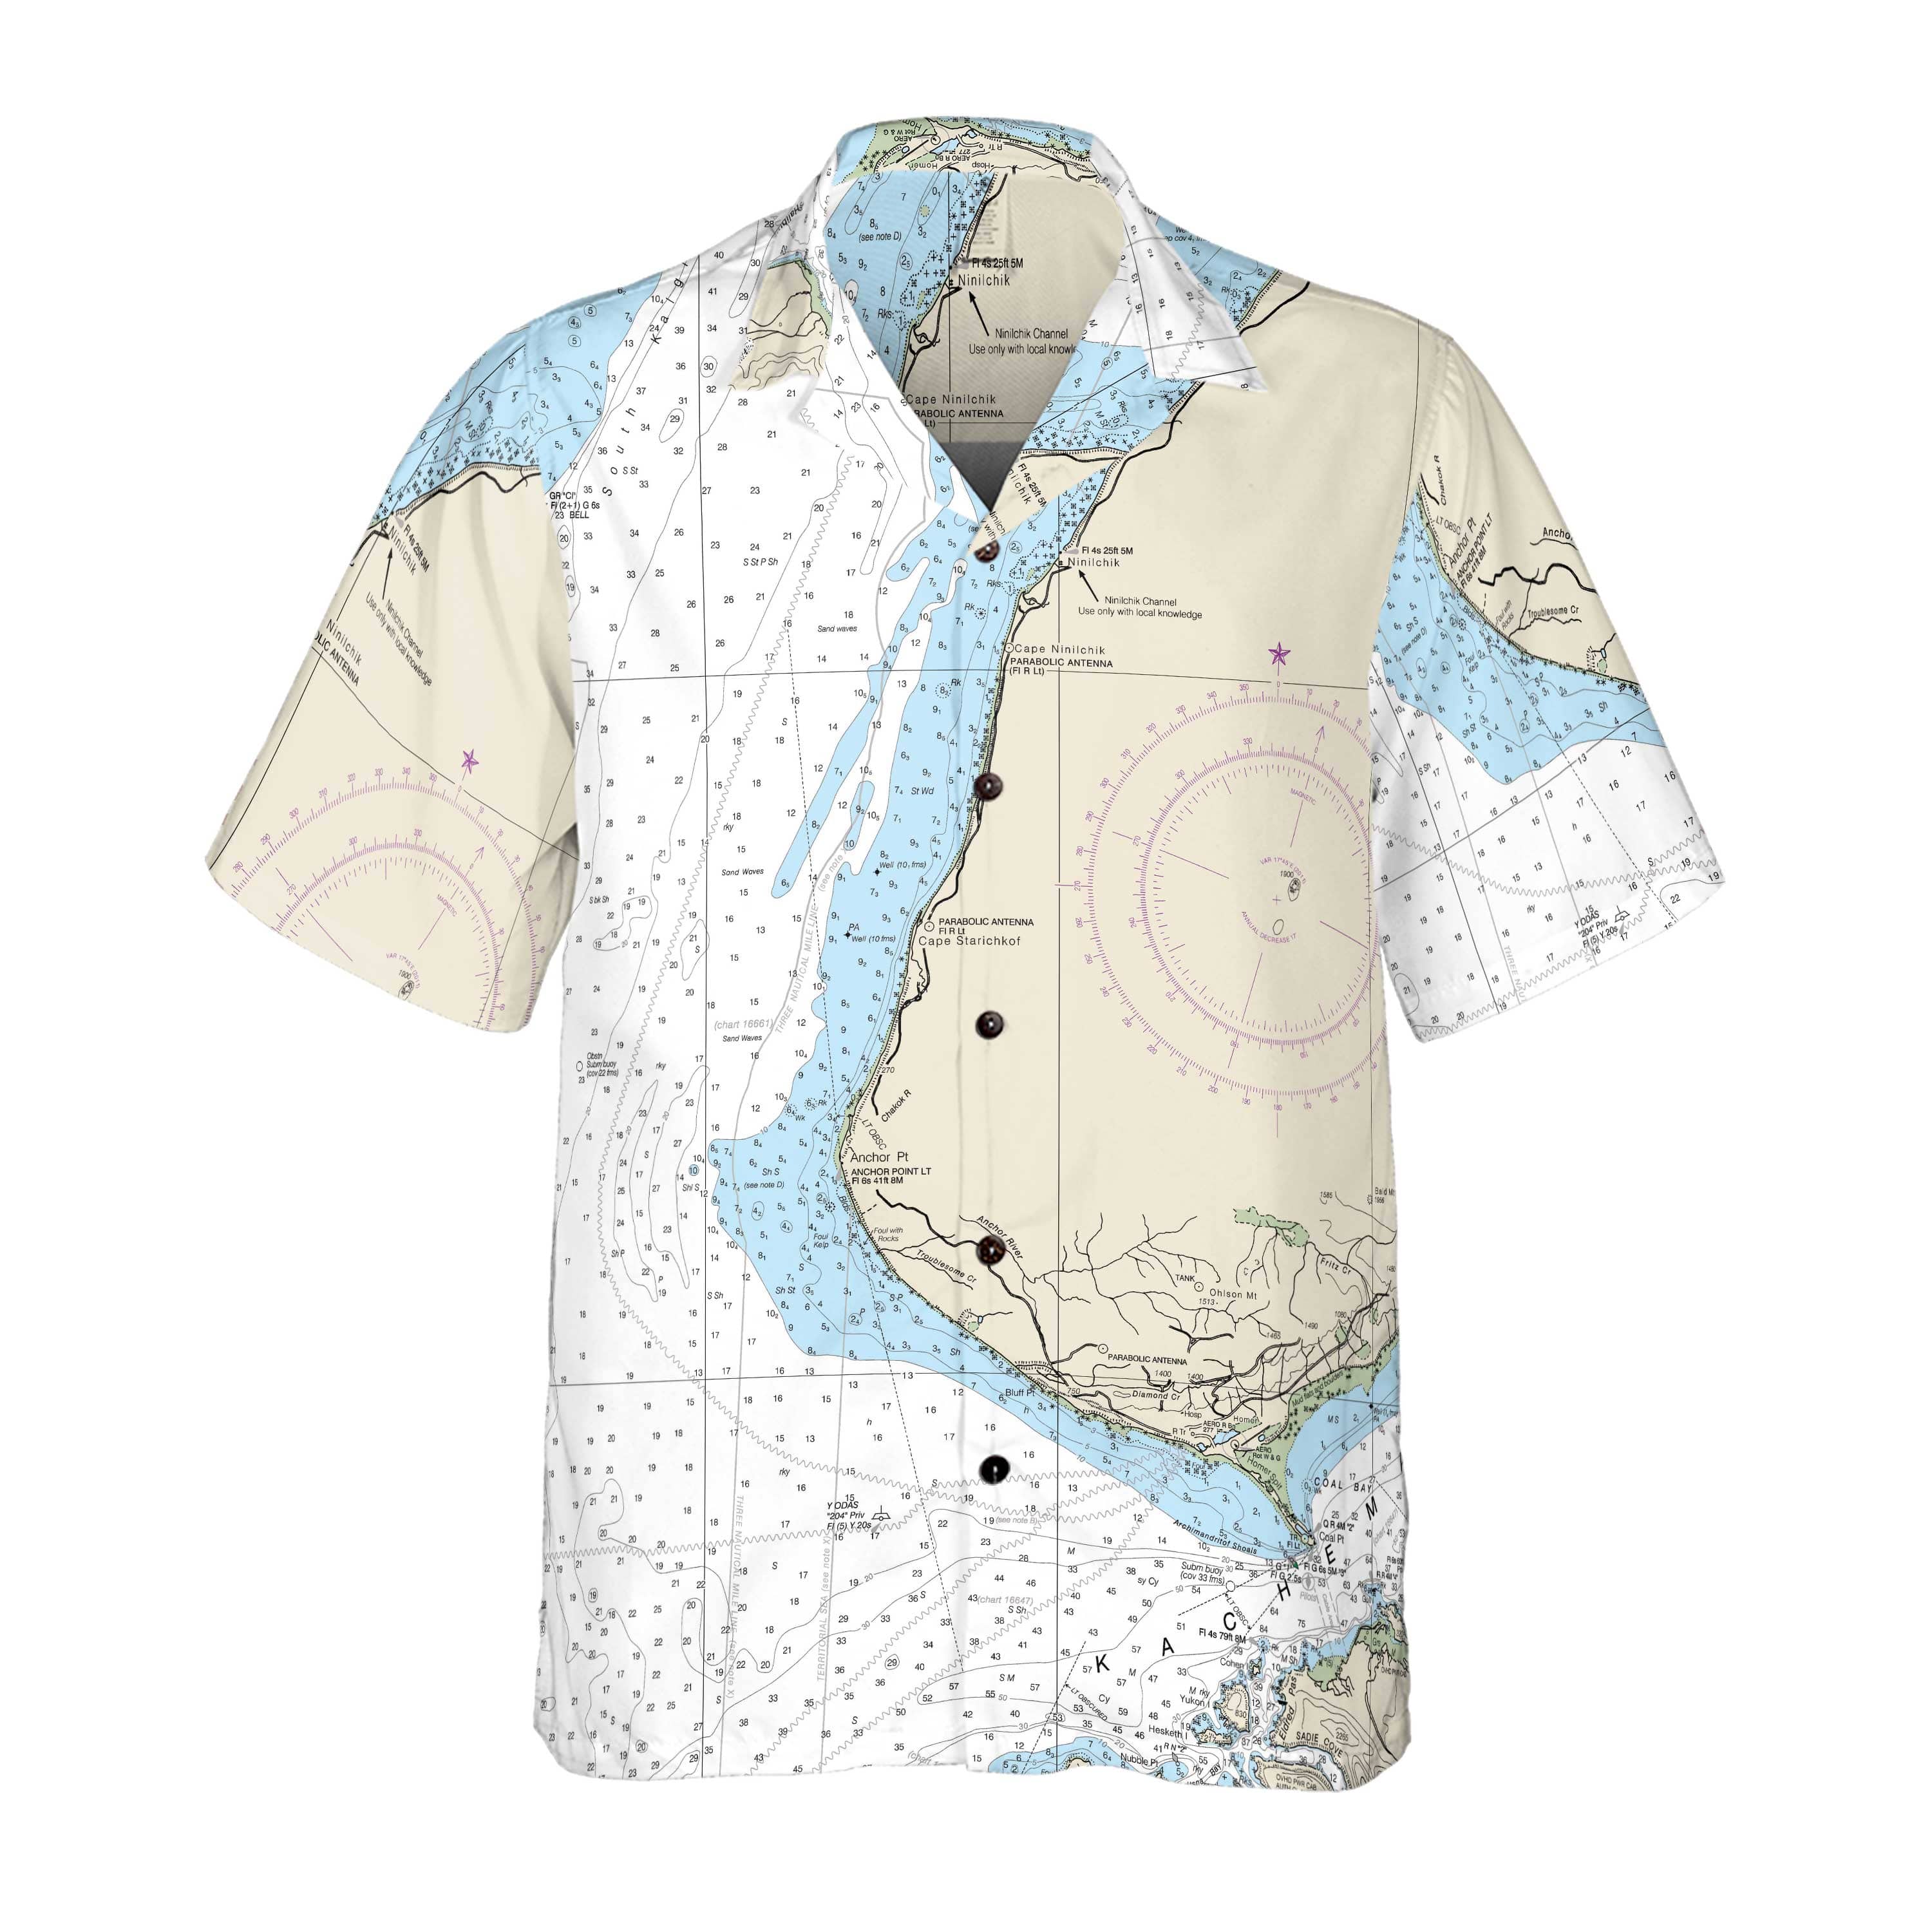 The Anchor Point Coconut Button Camp Shirt